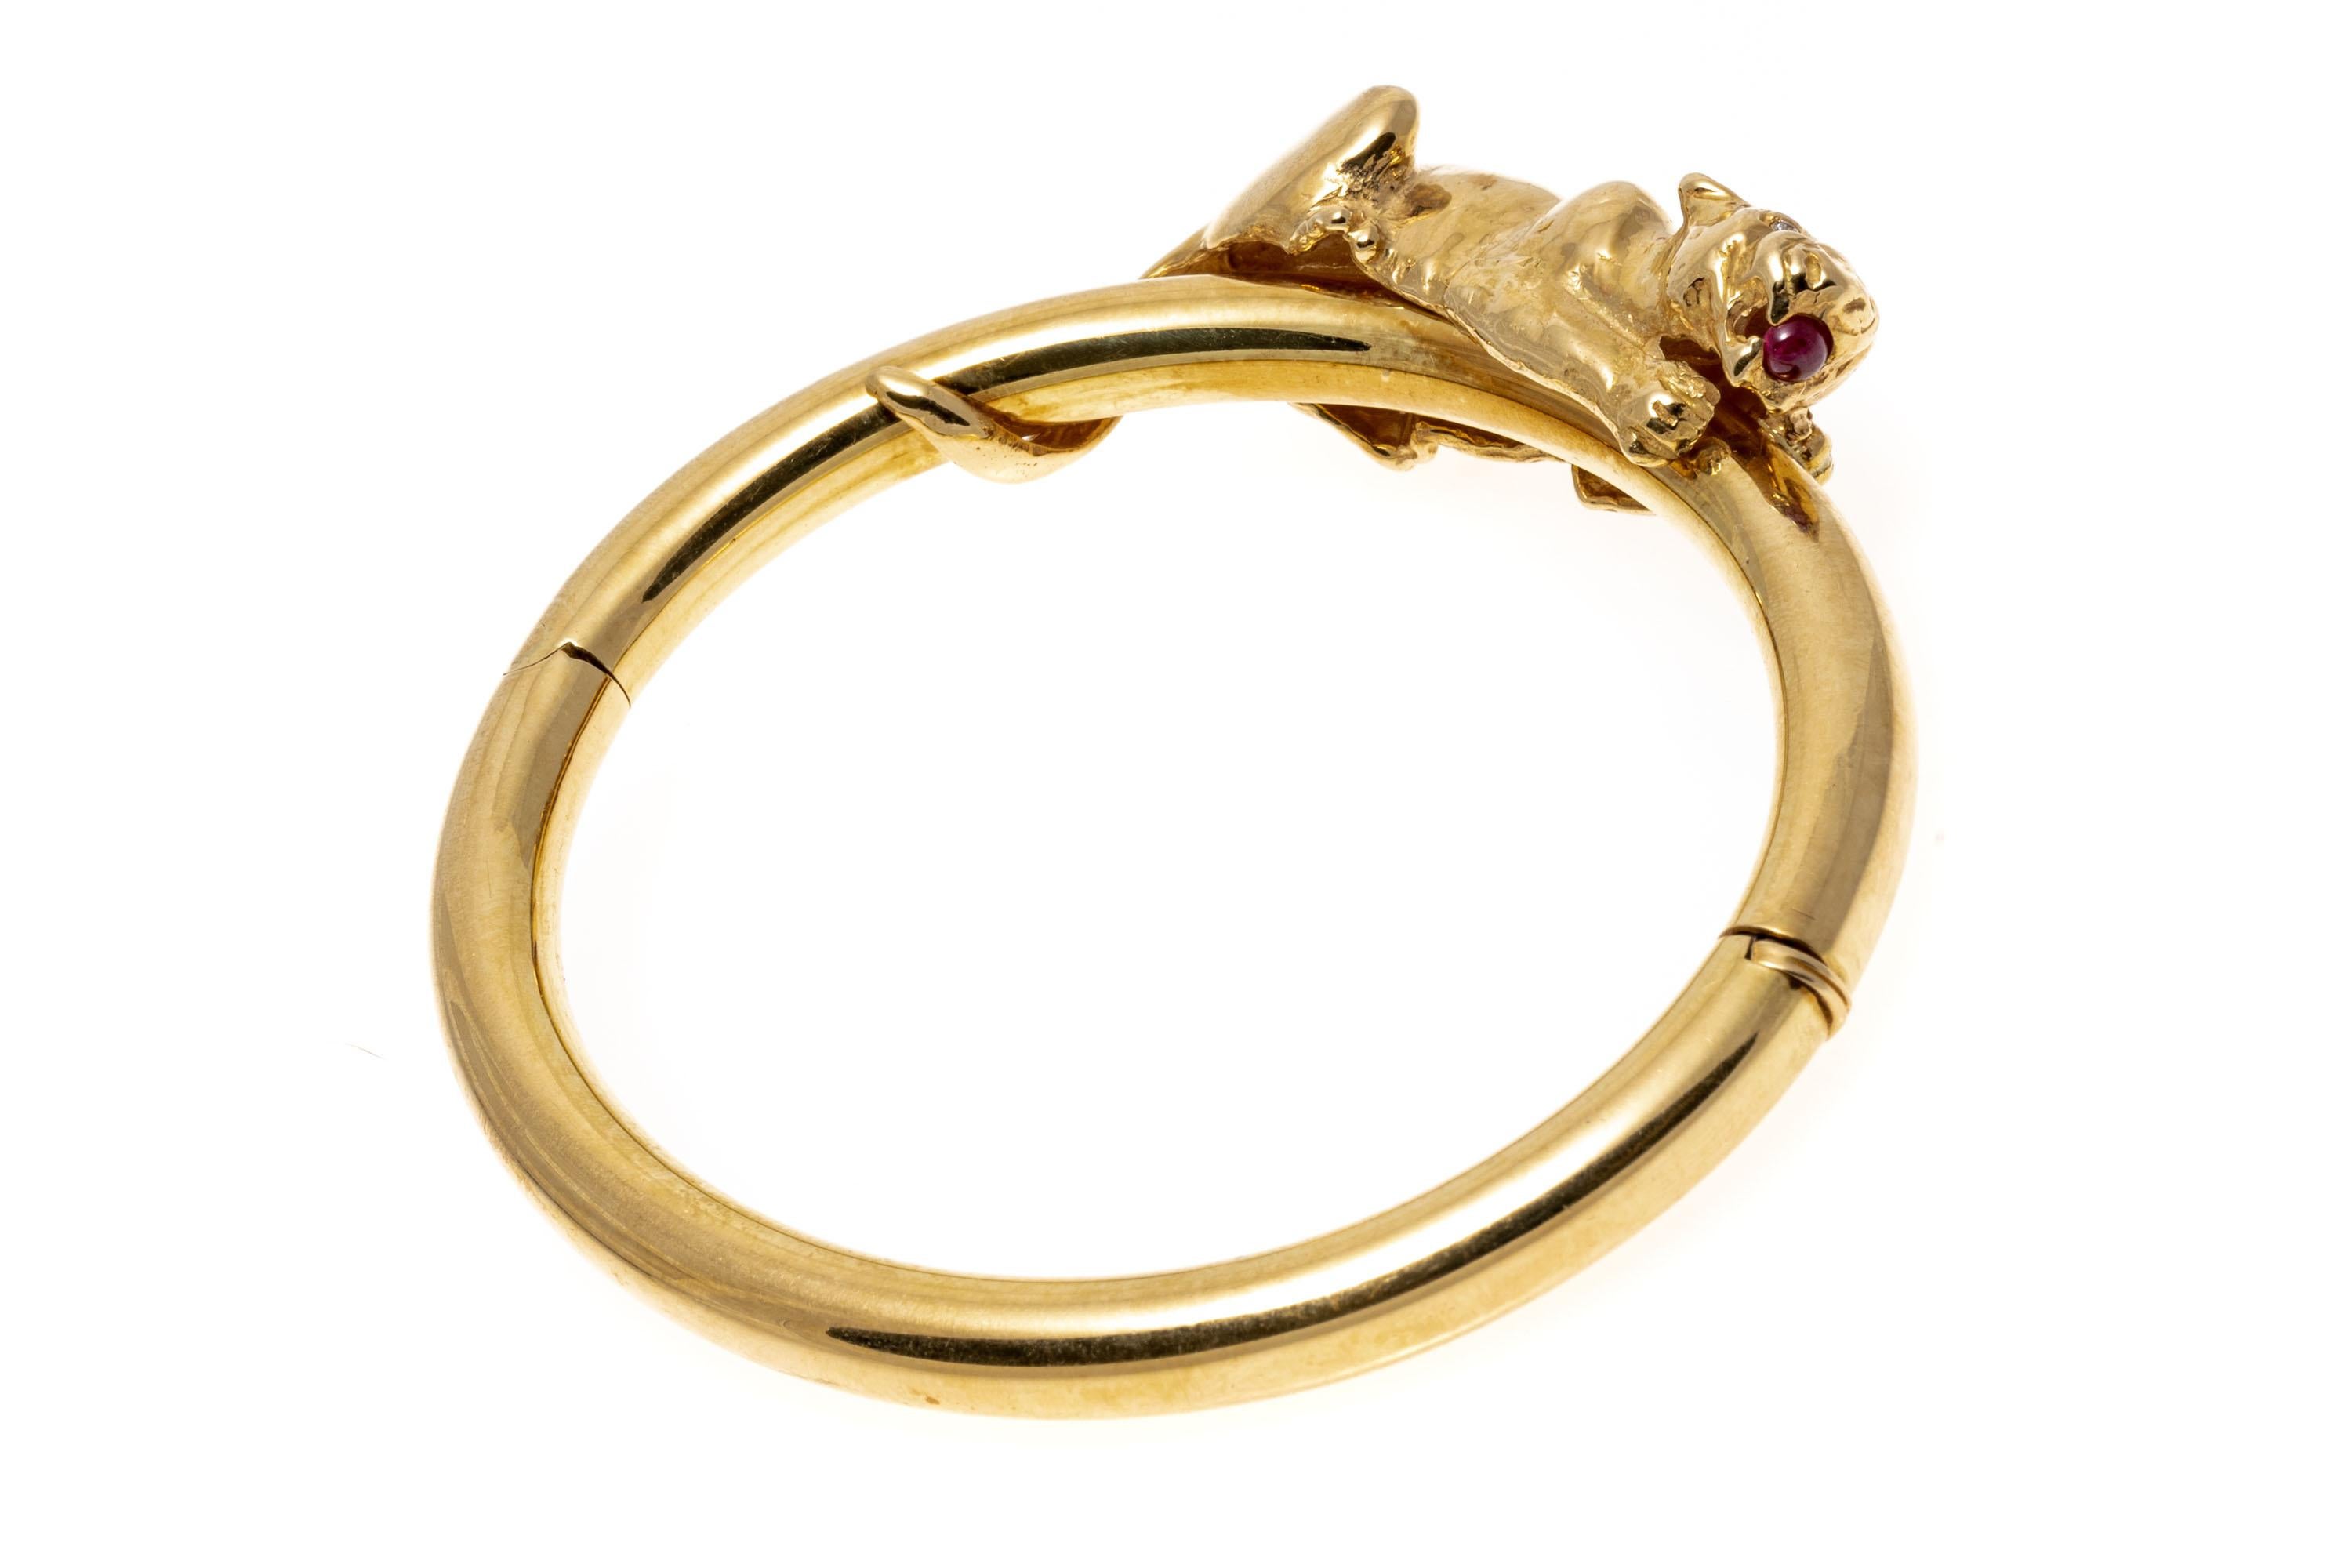 18k Yellow Gold Wonderful Figural Crouching Panther Hinged Bangle Bracelet.
This wonderful hinged bangle bracelet features a high polished, wide tube style bracelet, decorated with a figural crouching tiger top, with diamond eyes, approximately 0.02